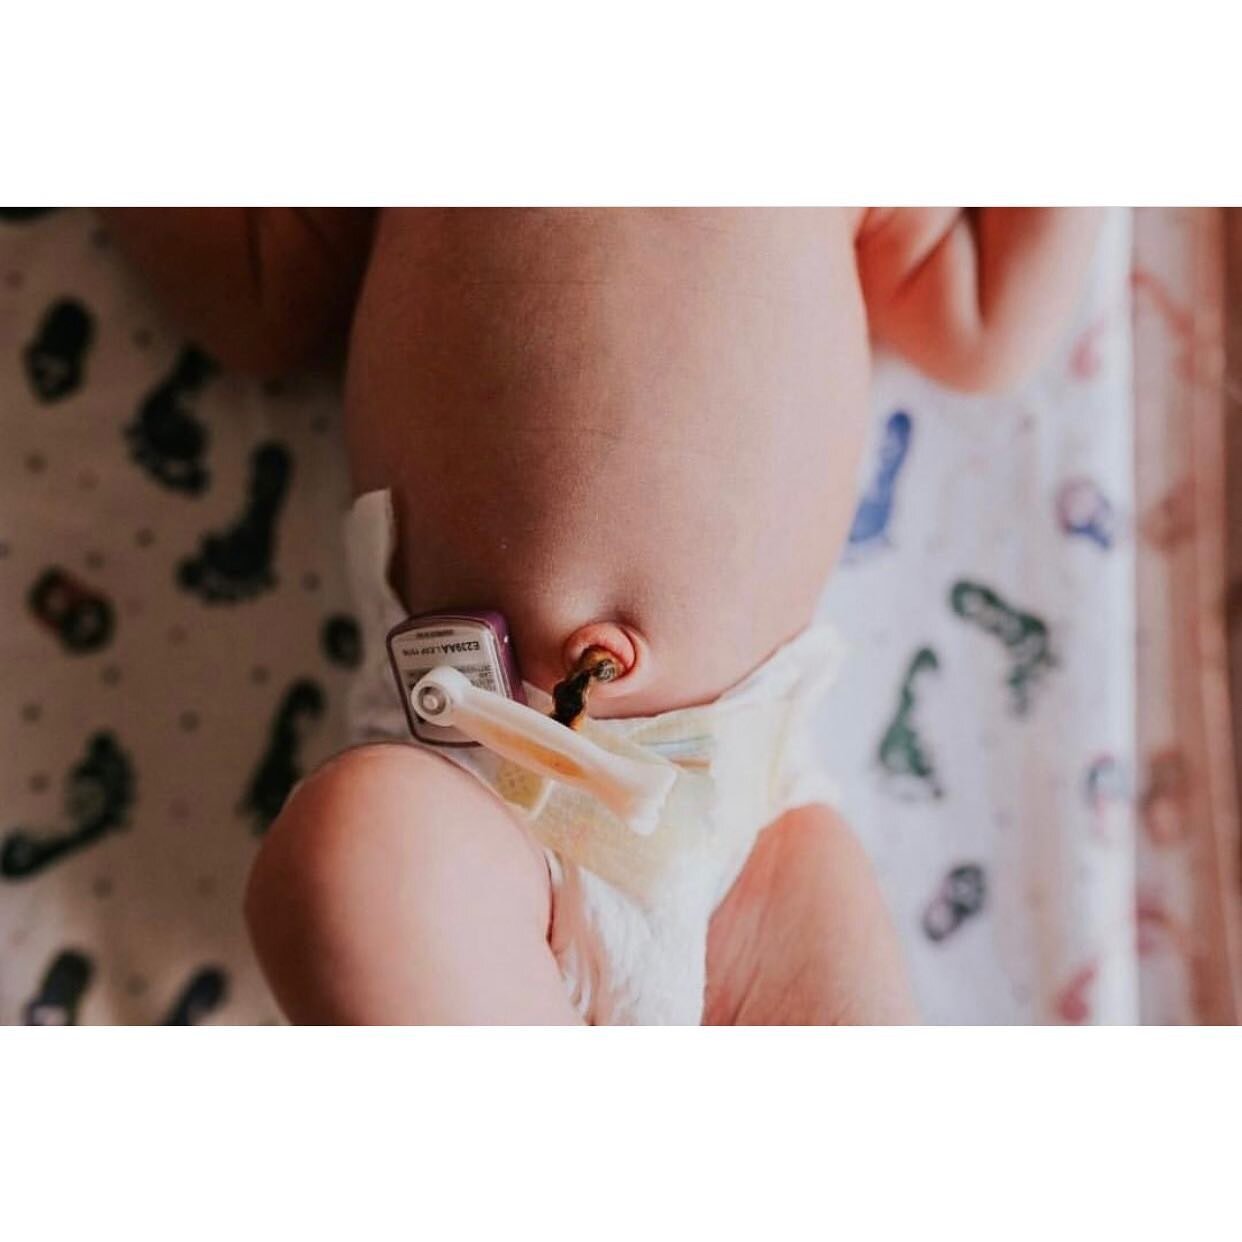 How to Care for a Newborn's Umbilical Cord ✨❤️

The umbilical cord is truly an incredible thing. It's the life-line that carries important nutrients and blood from the mother to the baby.⁠ 🪢

✂️ At birth, the umbilical cord is clamped and cut - leav